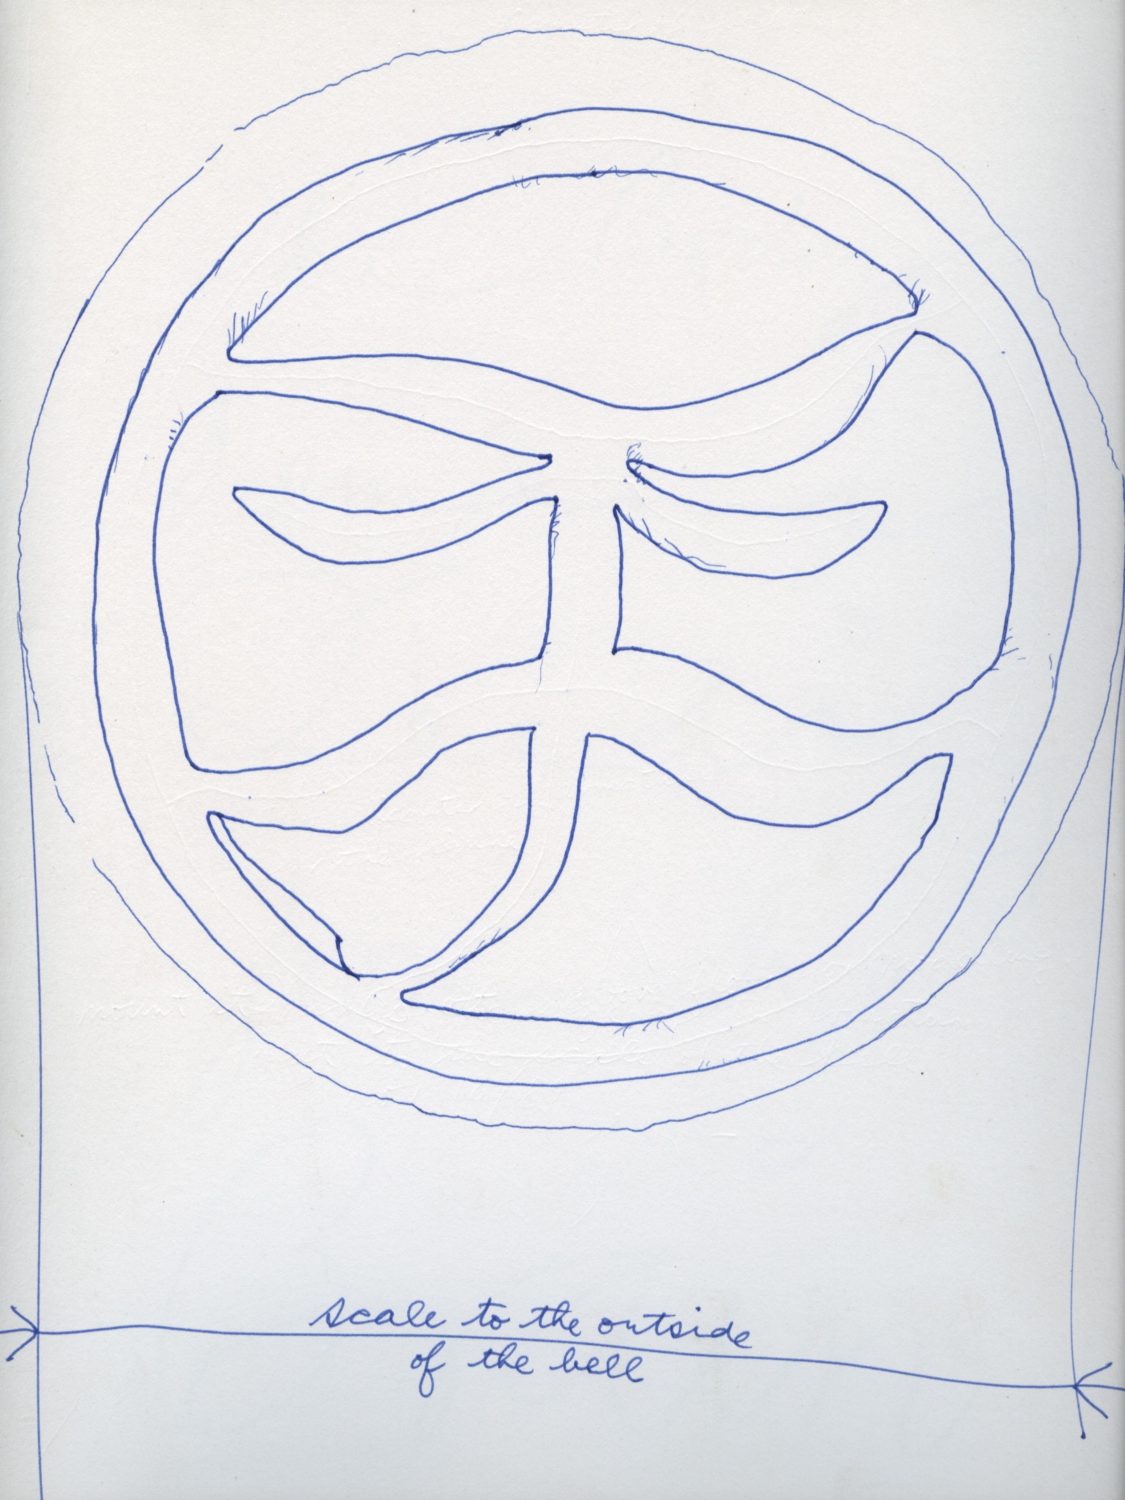 Sketch and notebook (February 1989 – November 1991)